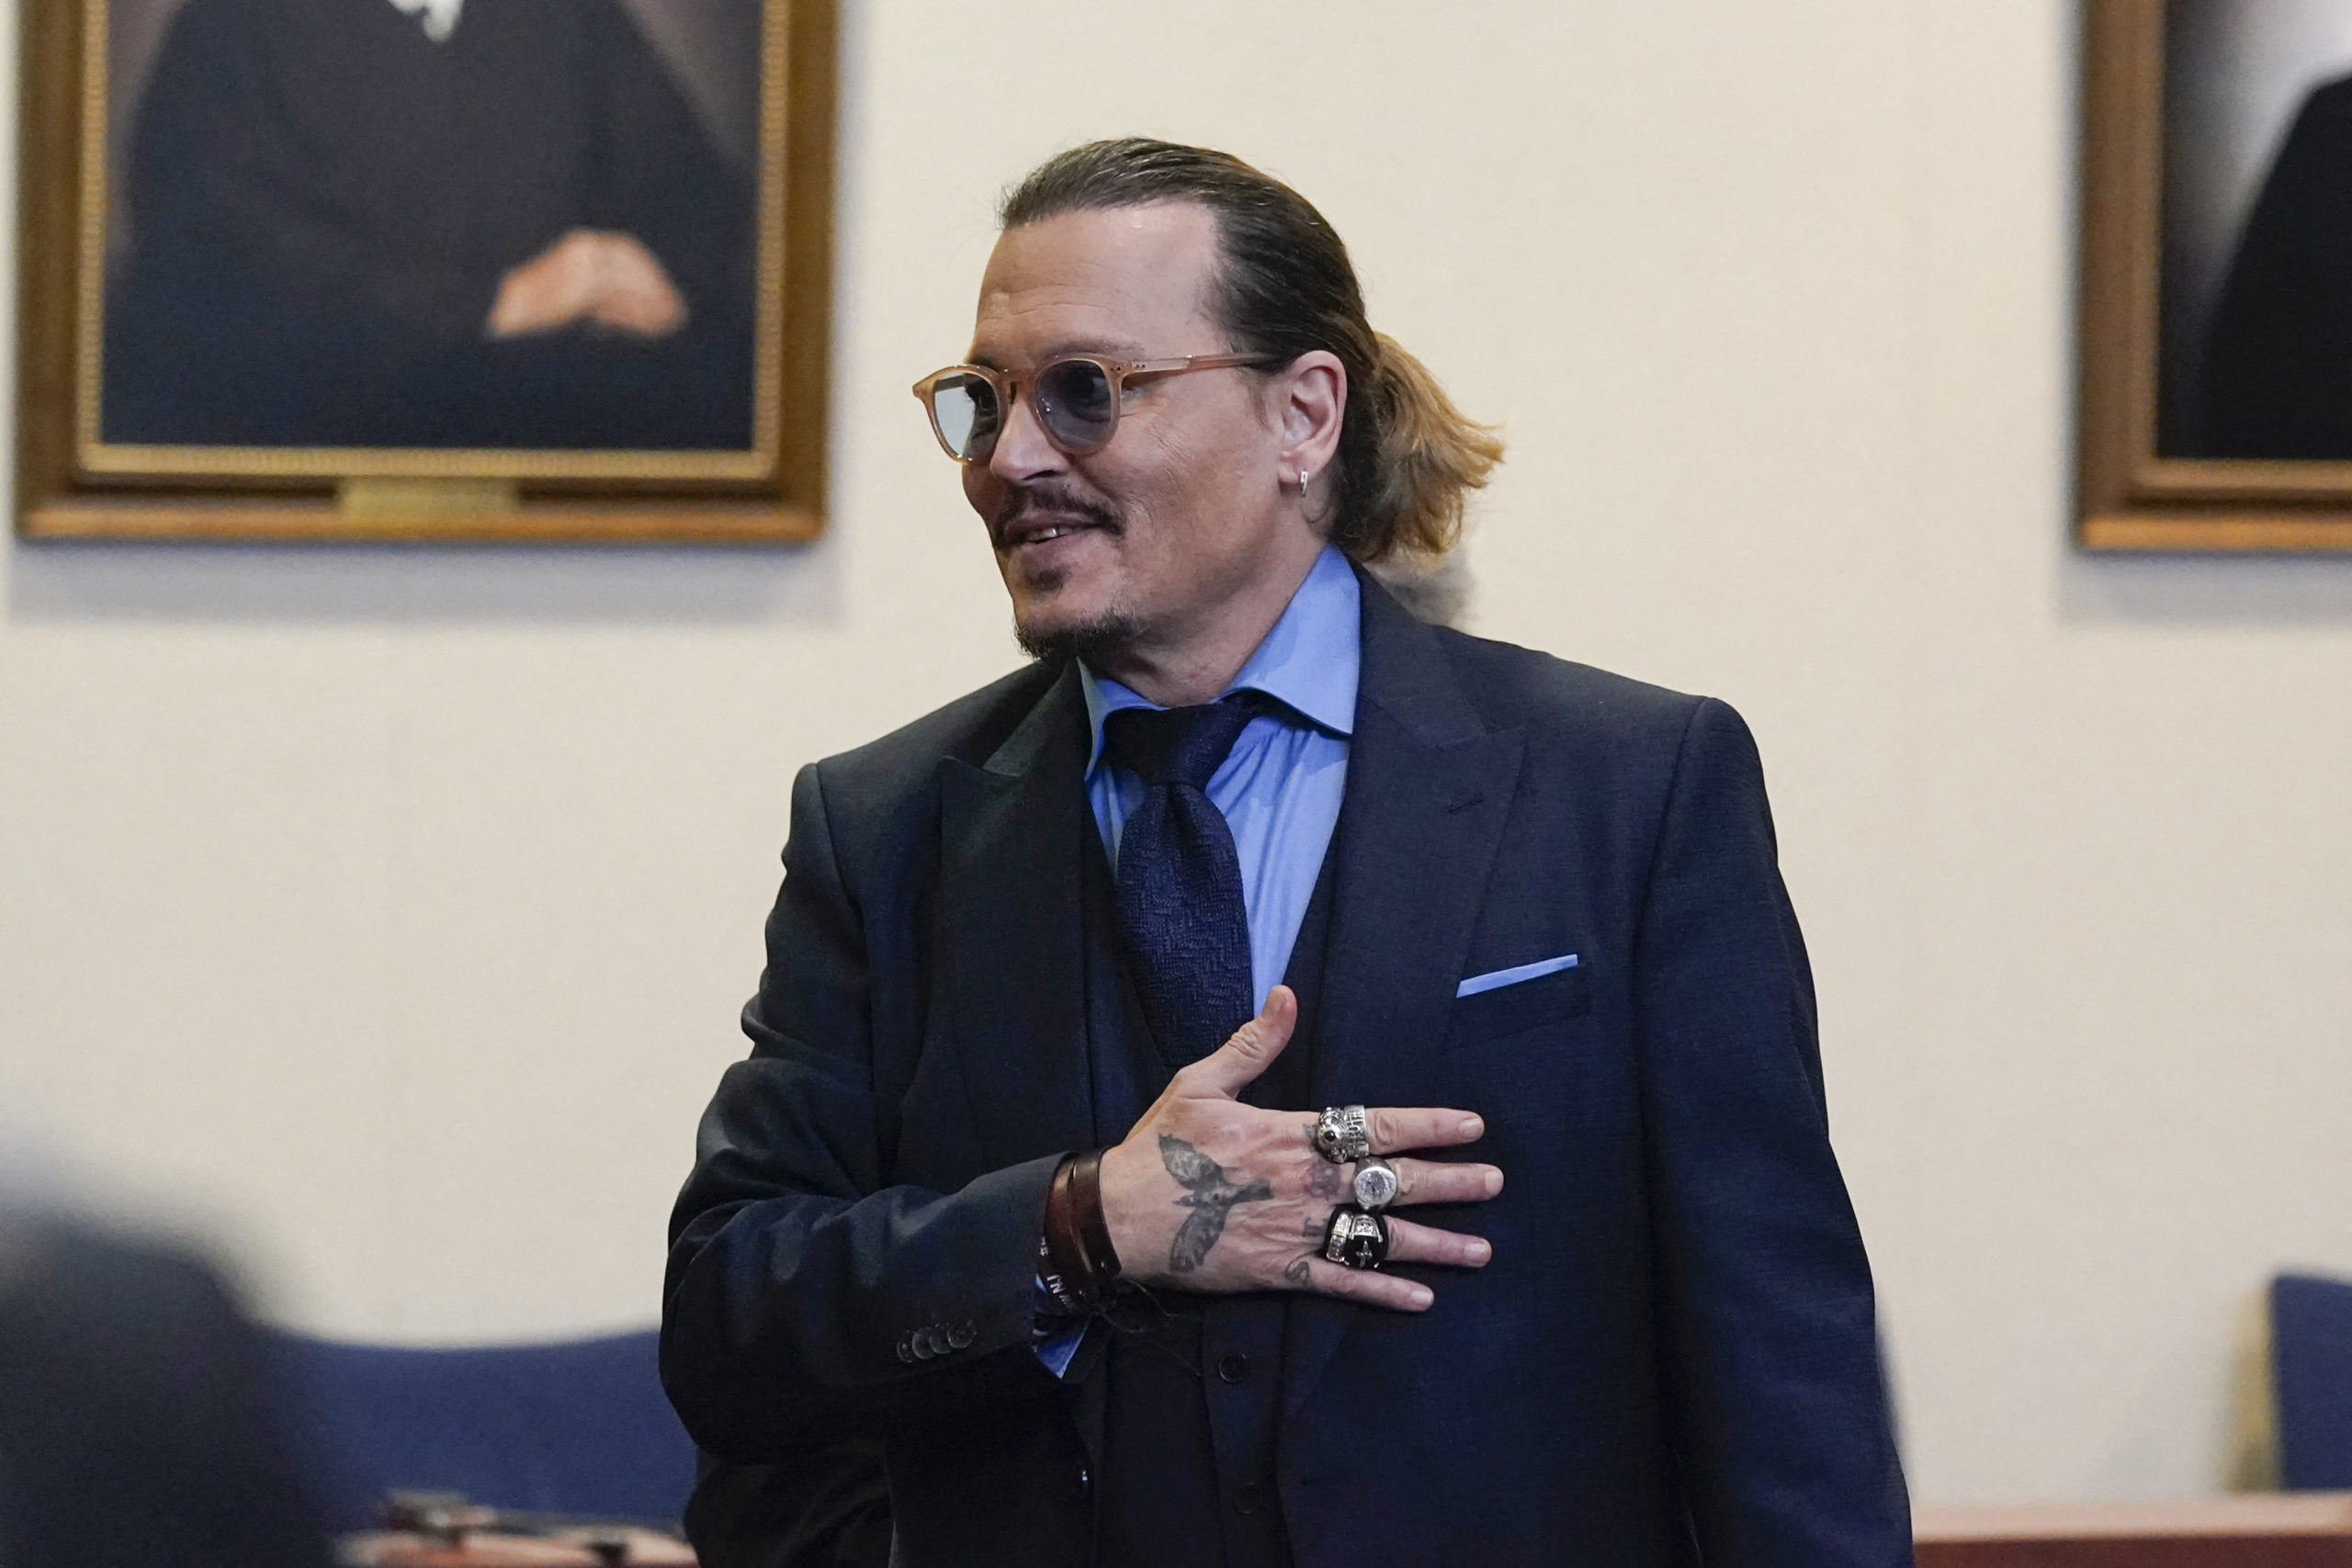 Actor Johnny Depp gestures to spectators in court after closing arguments at the Fairfax County Circuit Courthouse in Fairfax, Virginia. - A US jury found June 1, 2022 that actress Amber Heard had made defamatory claims of abuse against her ex-husband Johnny Depp, and awarded him $15 million in damages. (Photo by Steve Helber / POOL / AFP)